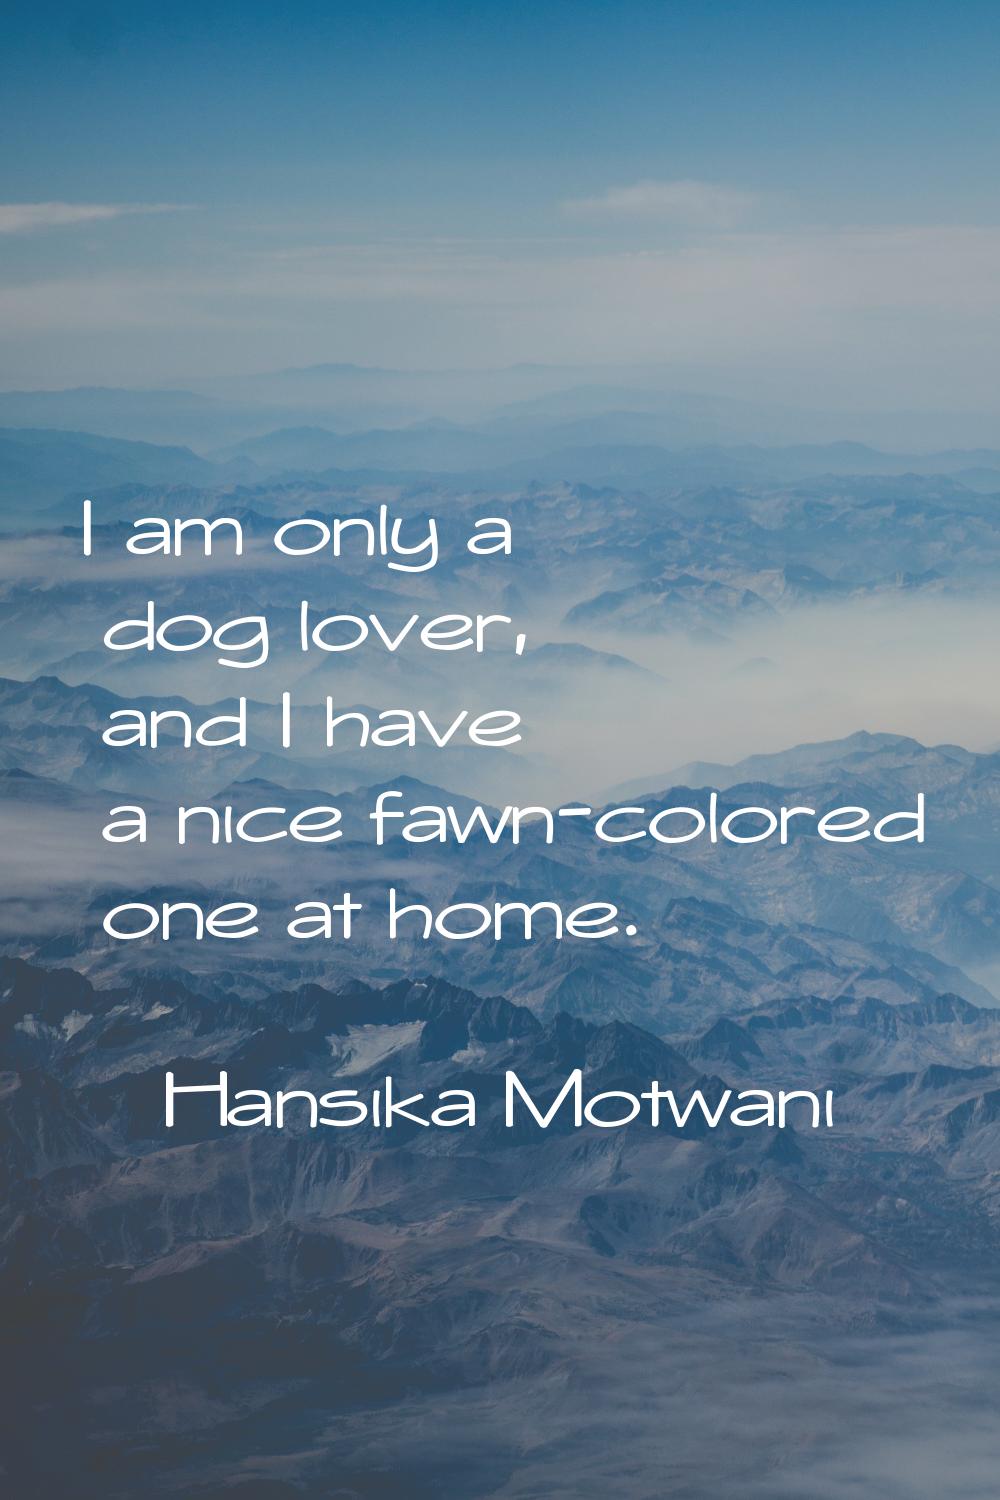 I am only a dog lover, and I have a nice fawn-colored one at home.